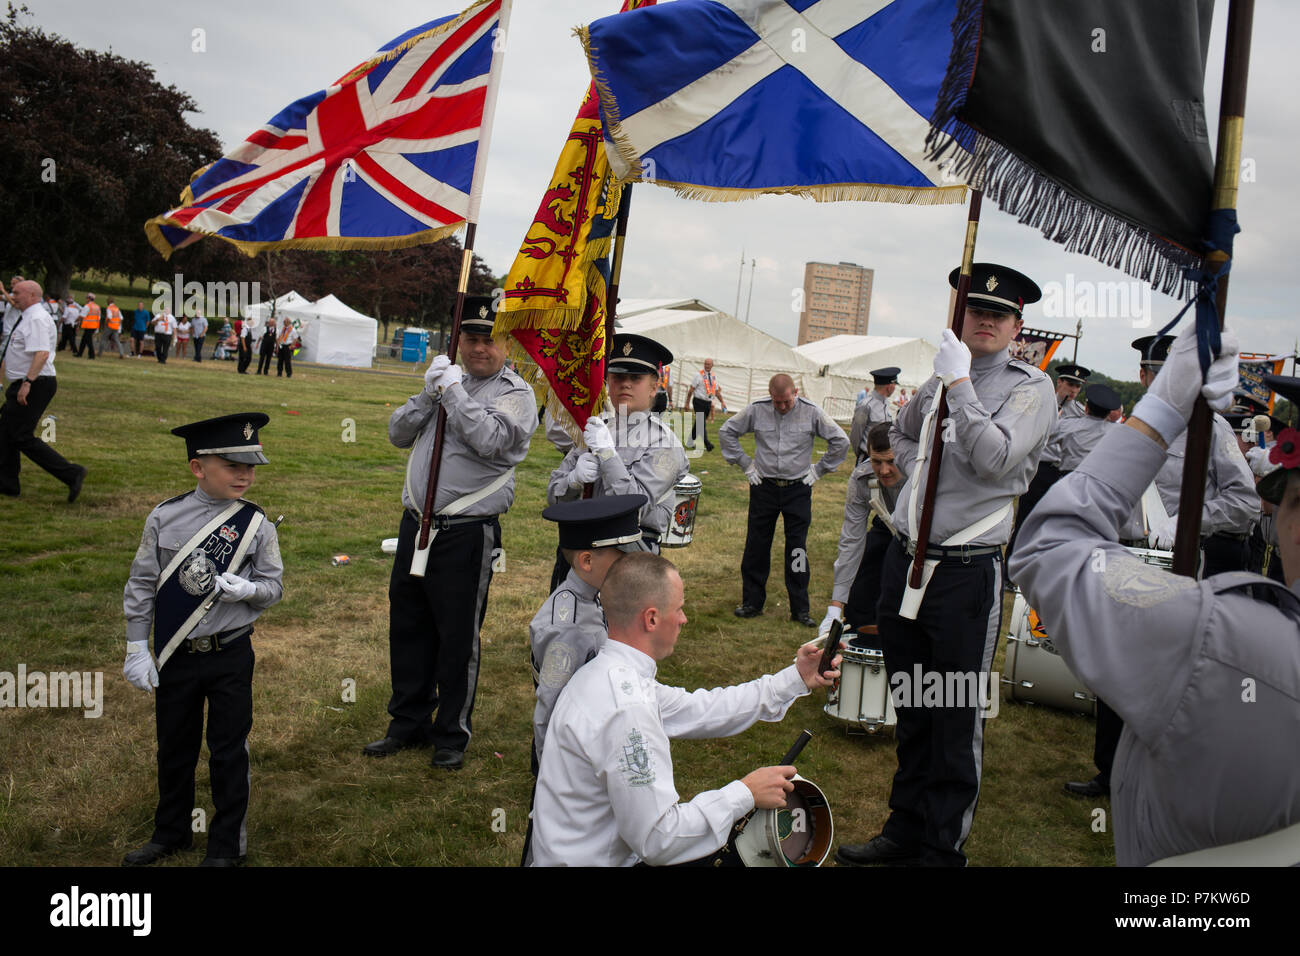 Glasgow, Scotland, on 7 July 2018. The annual Parade of Orange Order Lodge bands, organised by County Grand Orange Lodge of Glasgow.  The annual prade celebrates Prince William of Orange's victory over King James II at the Battle of the Boyne in 1690. Image Credit: Jeremy Sutton-Hibbert/Alamy Live News. Stock Photo